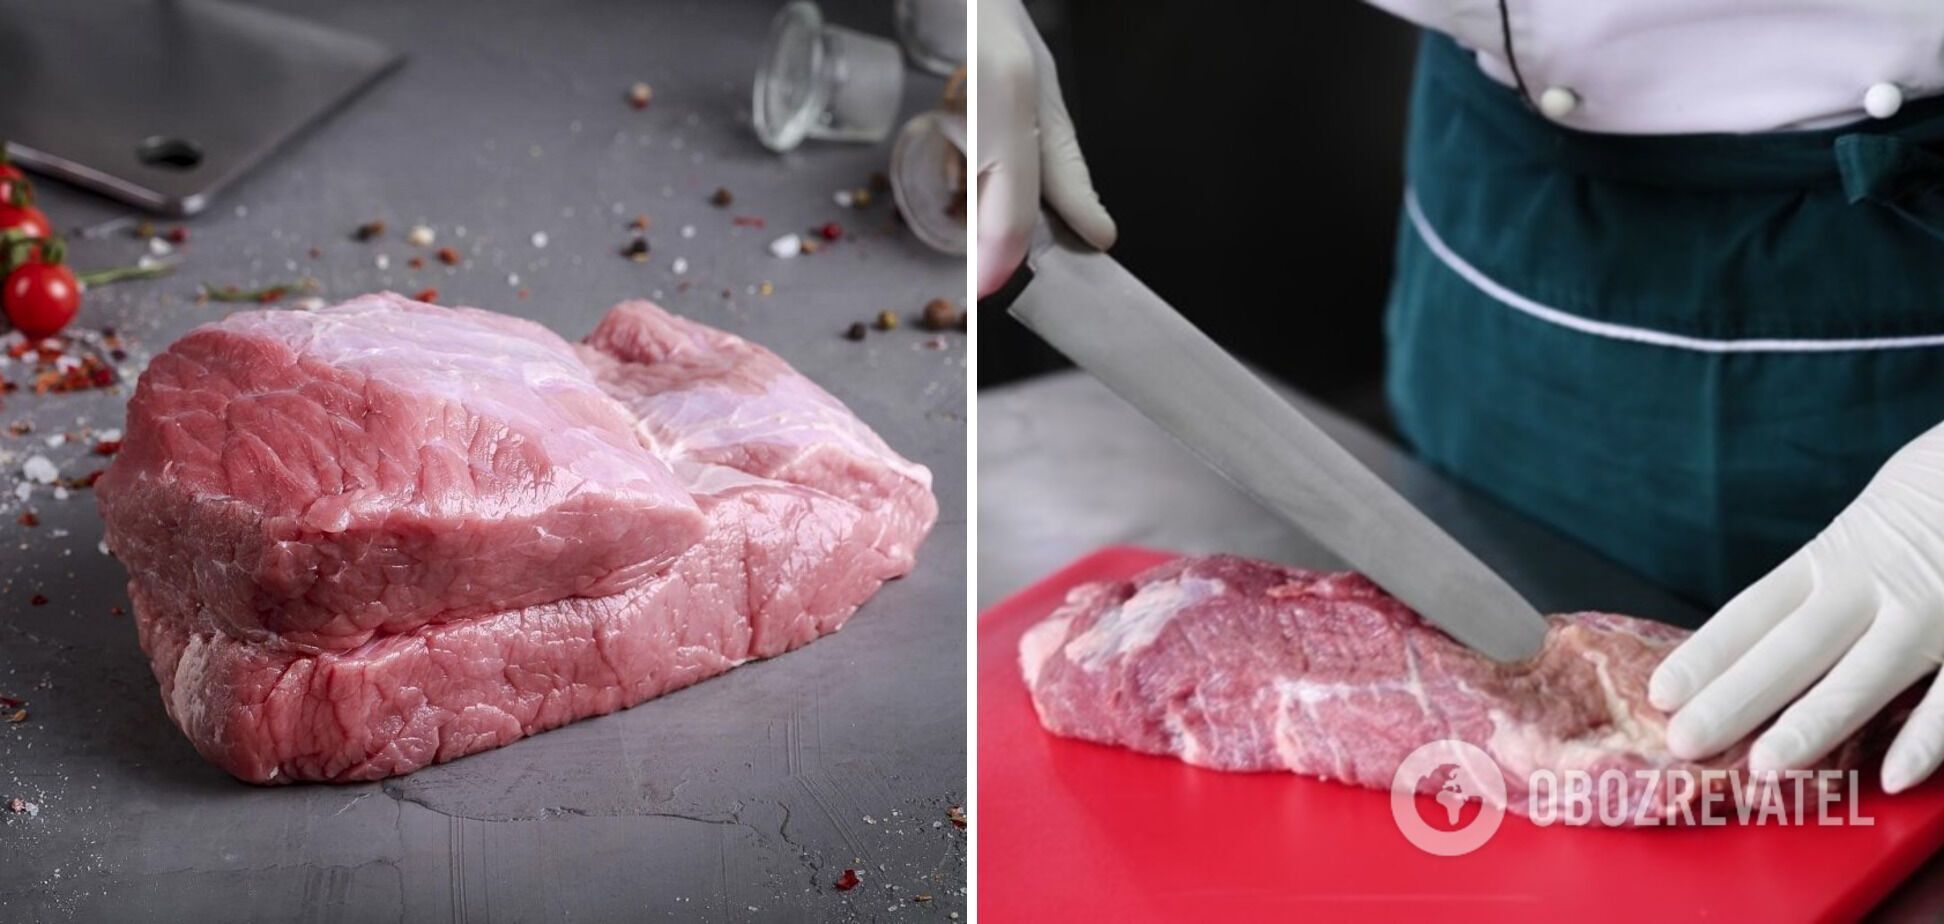 Never cook this kind of meat: how to recognize that the product is spoiled